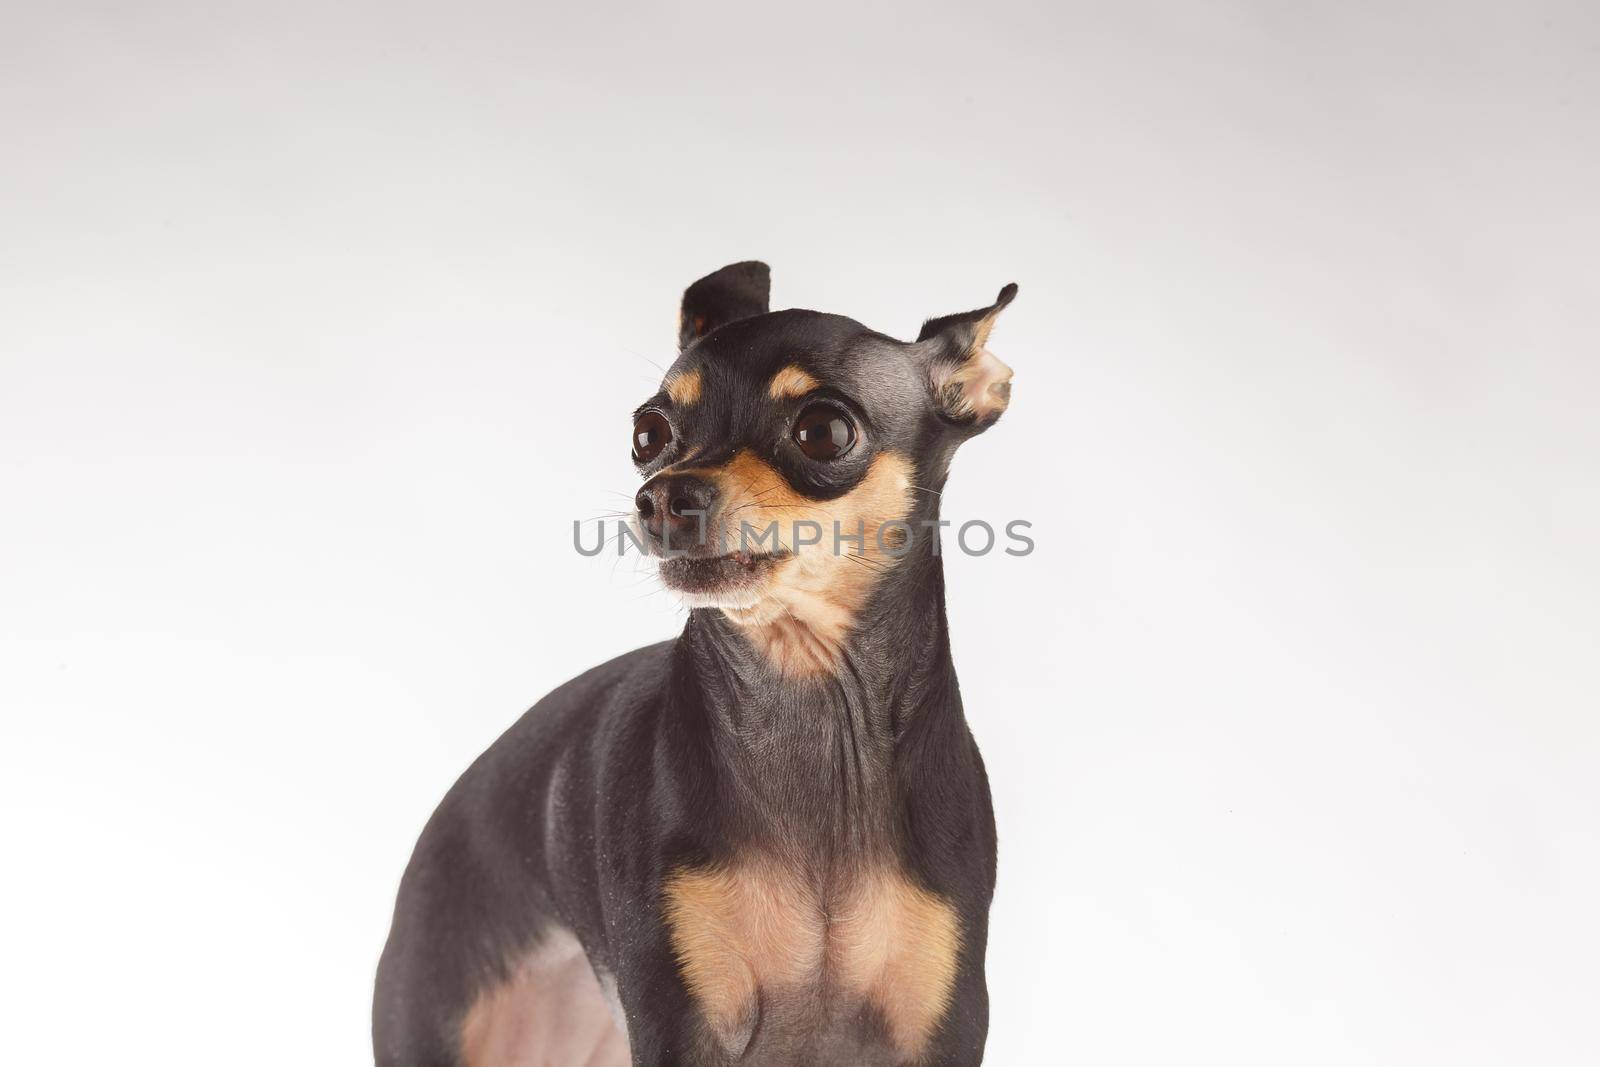 Toy Terrier dog photo portrait. Evil look by Gravika